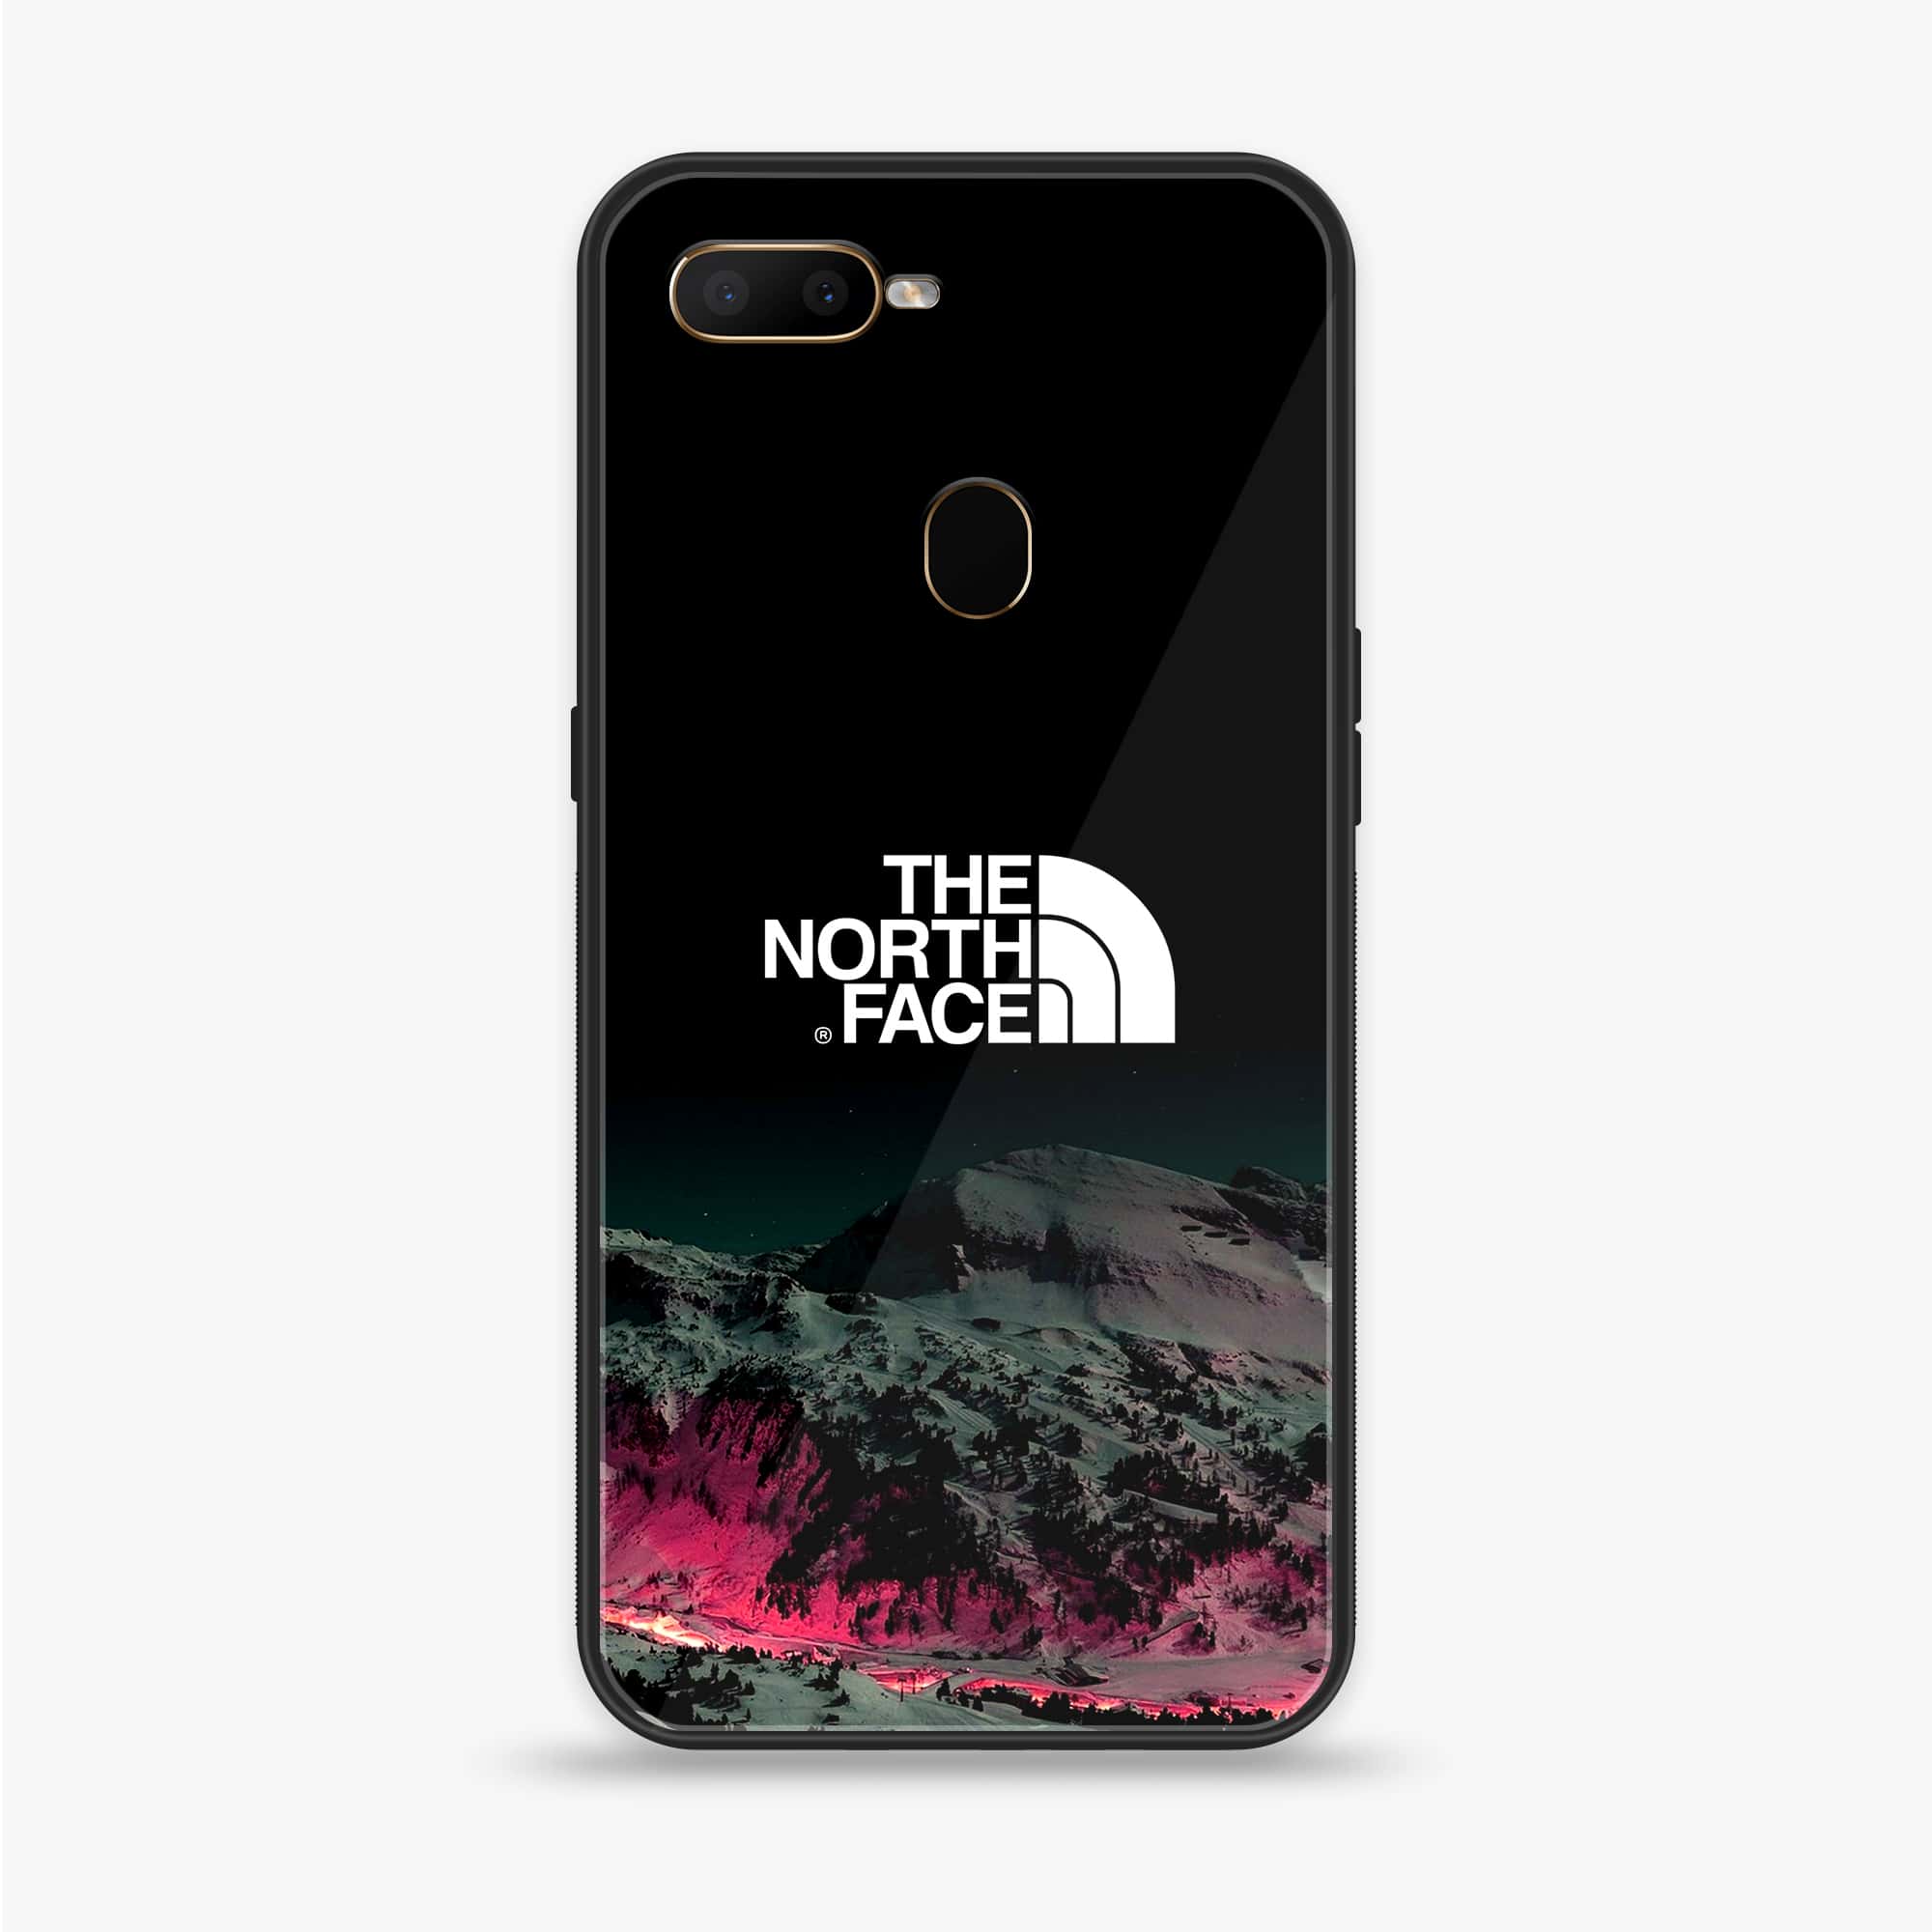 OPPO A5s - The North Face Series - Premium Printed Glass soft Bumper shock Proof Case